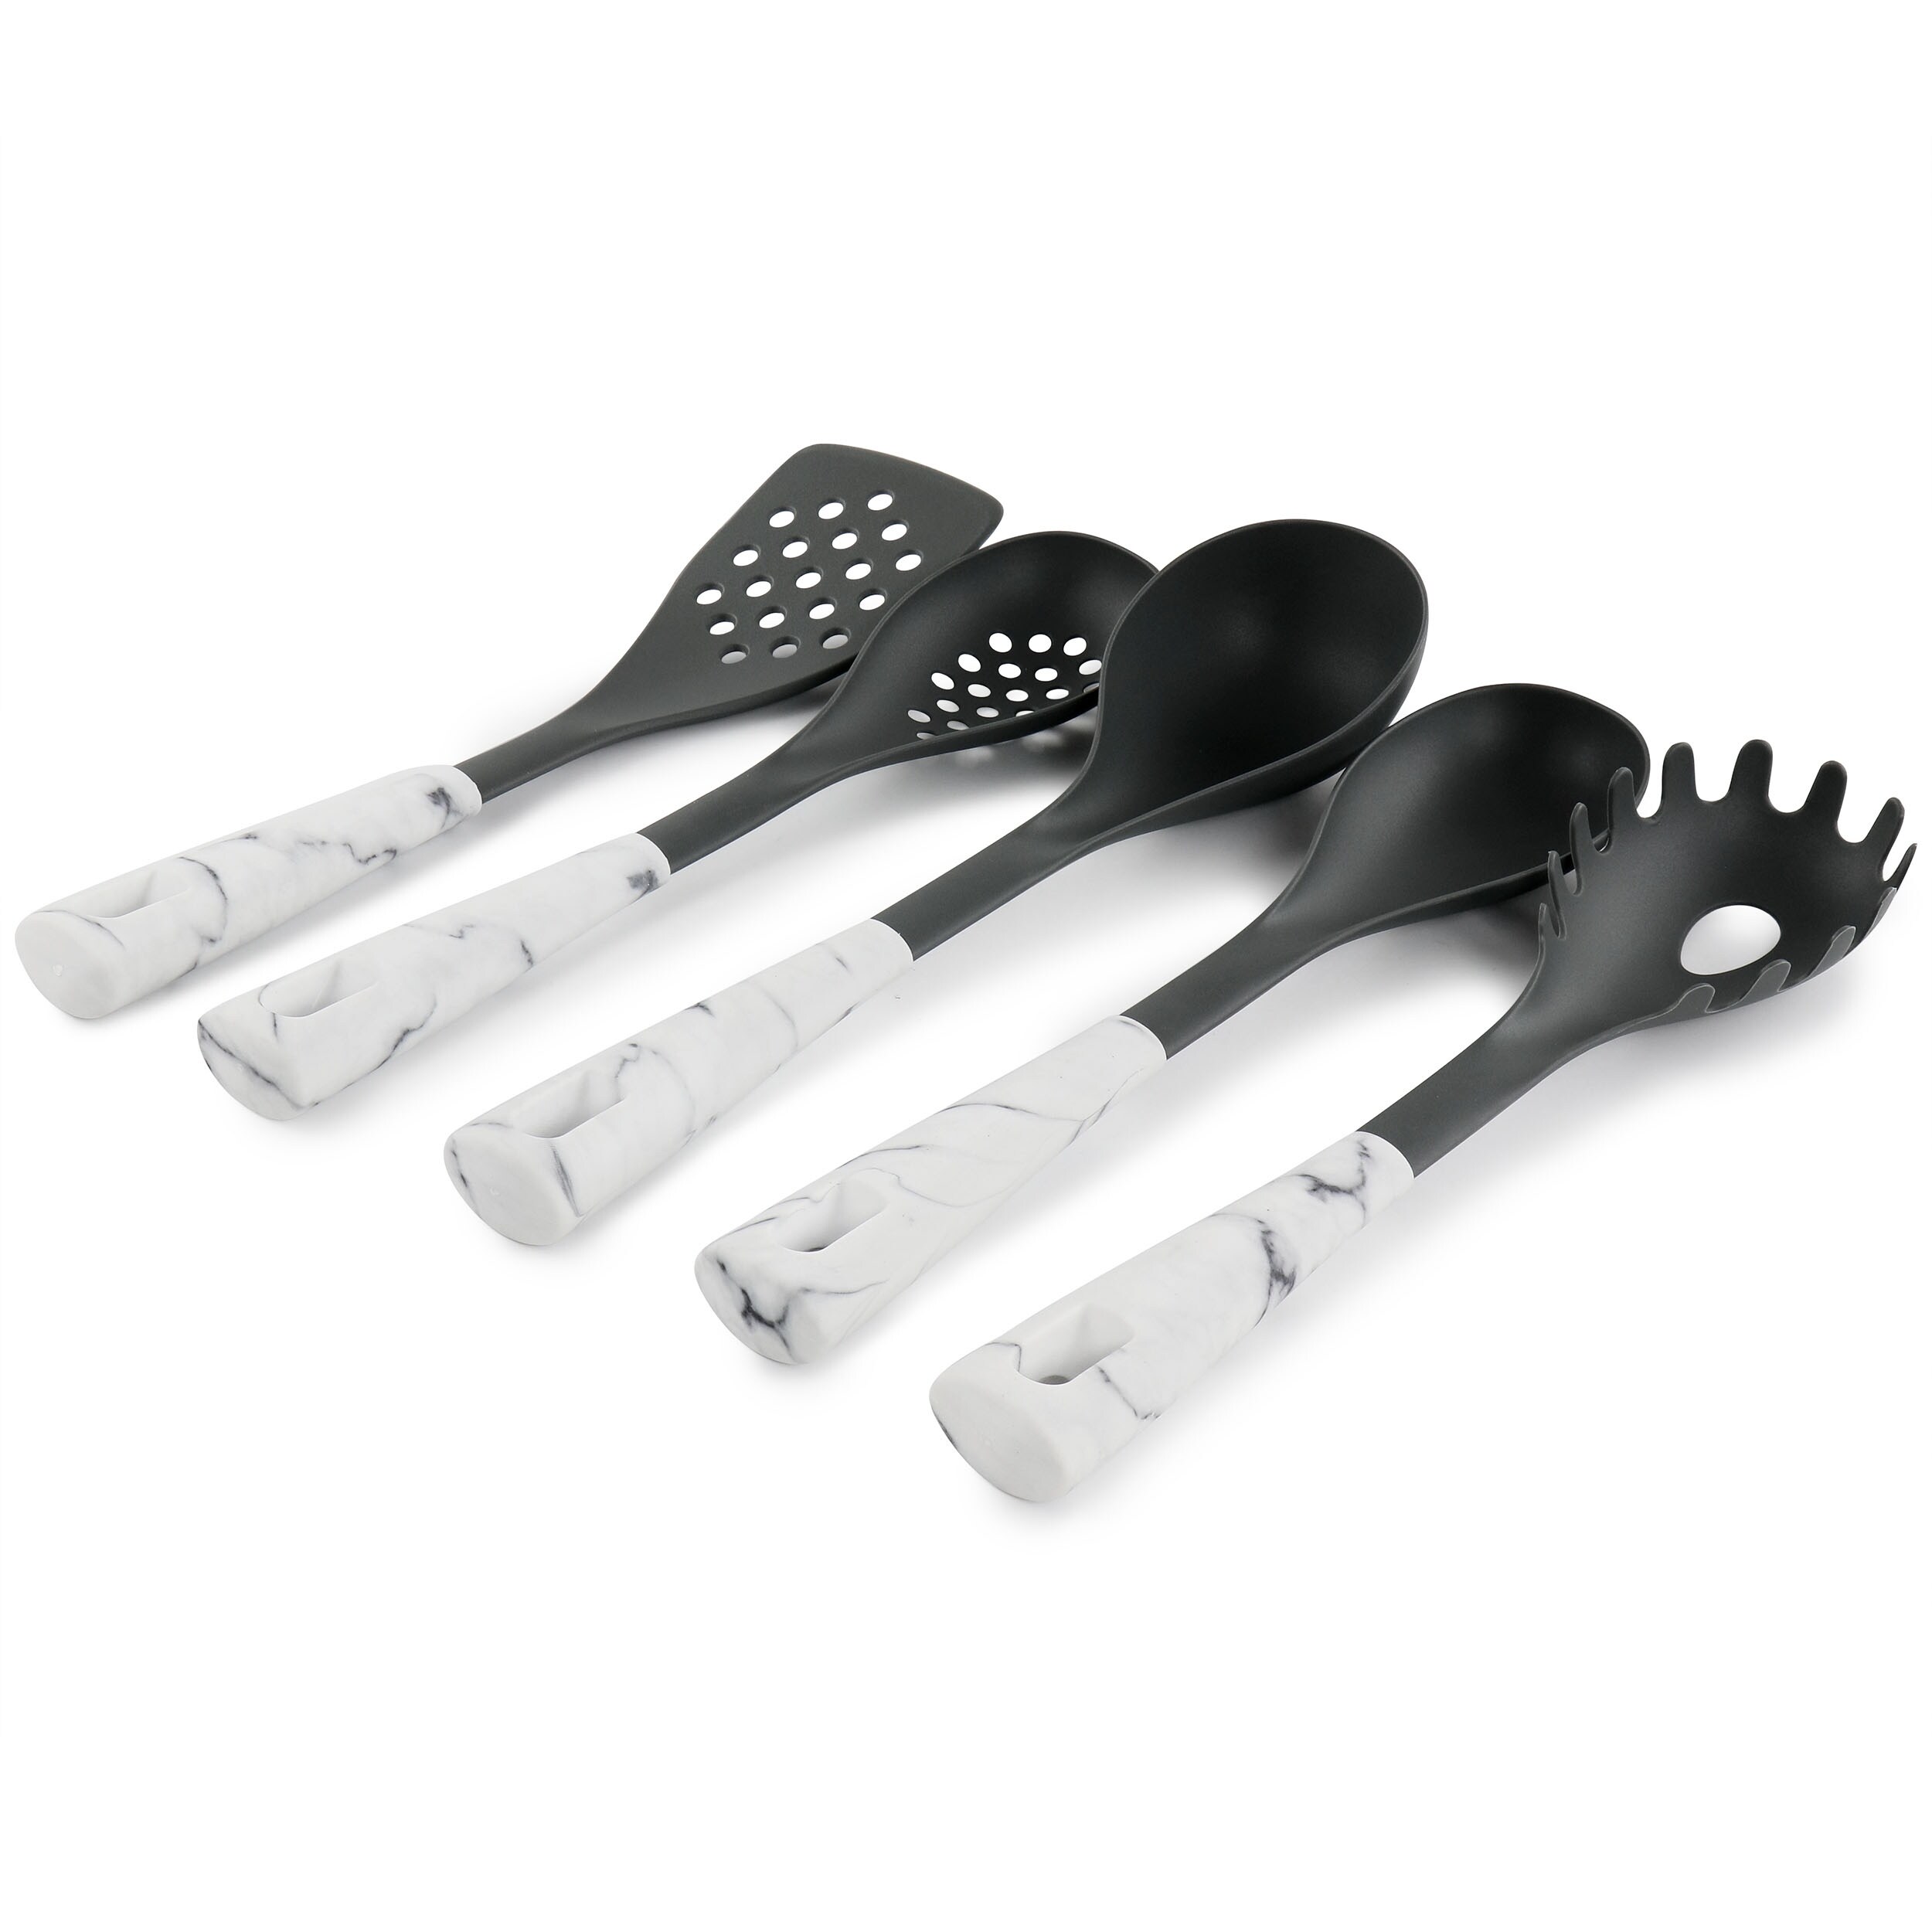 https://ak1.ostkcdn.com/images/products/is/images/direct/34907f845bac46e3624ac4fc6ca3f63c156675be/Oster-5-Piece-Nylon-Kitchen-Tool-Set.jpg